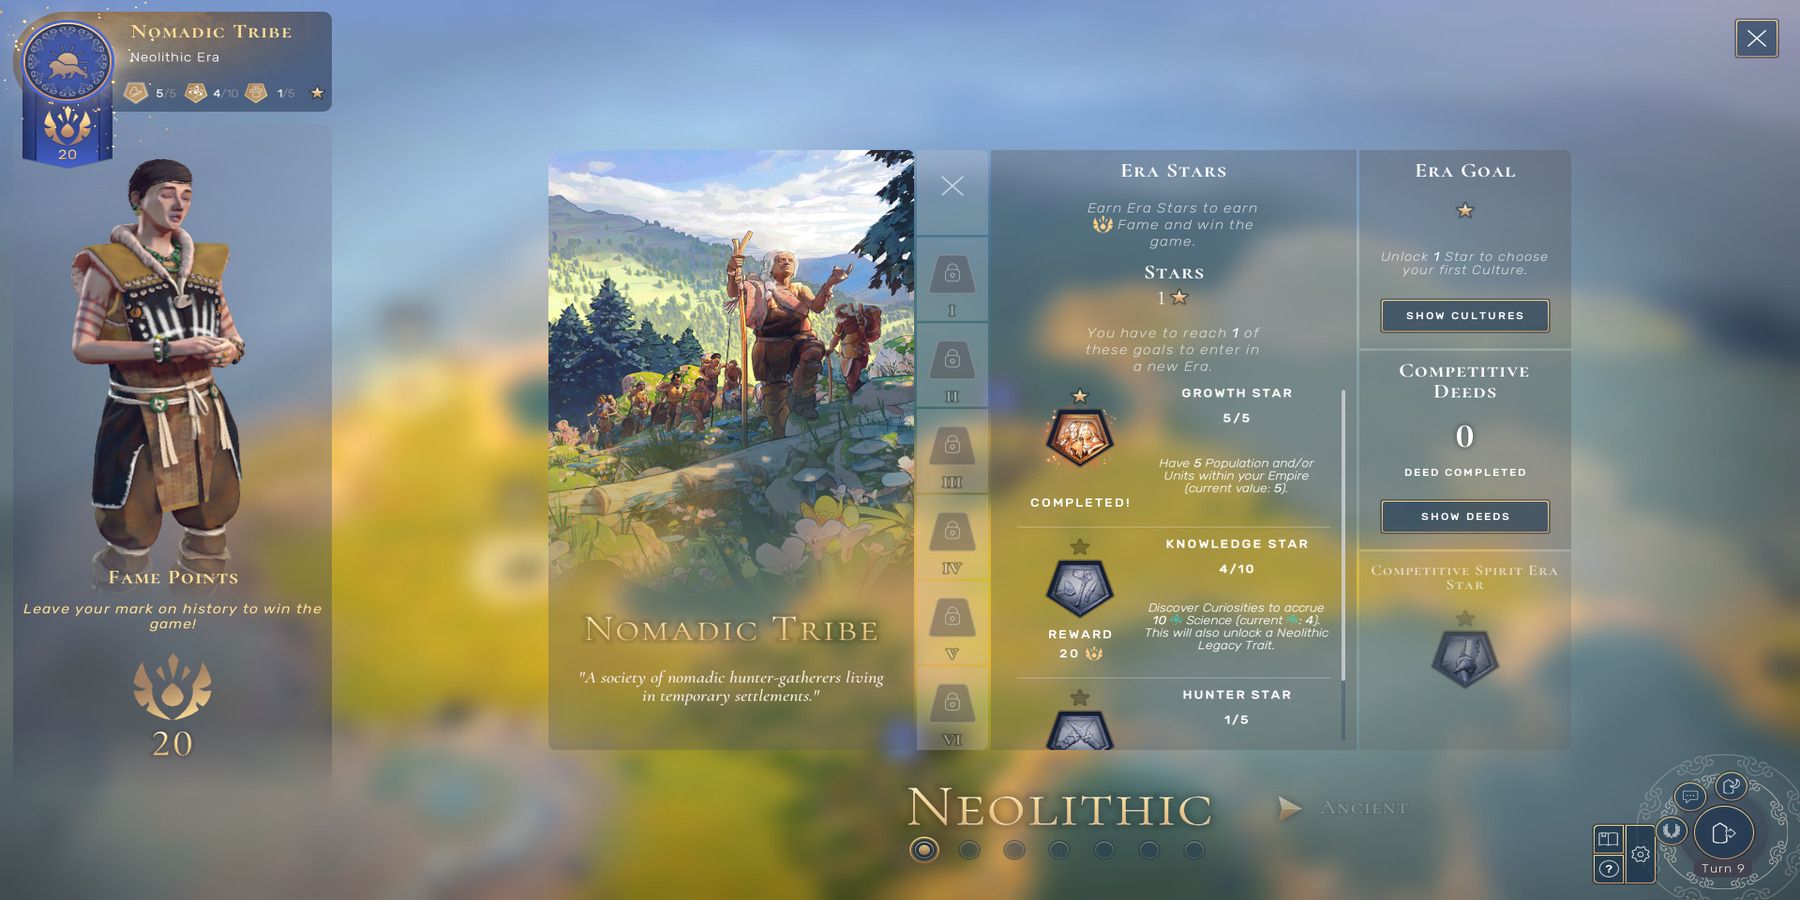 Neolithic Era overview